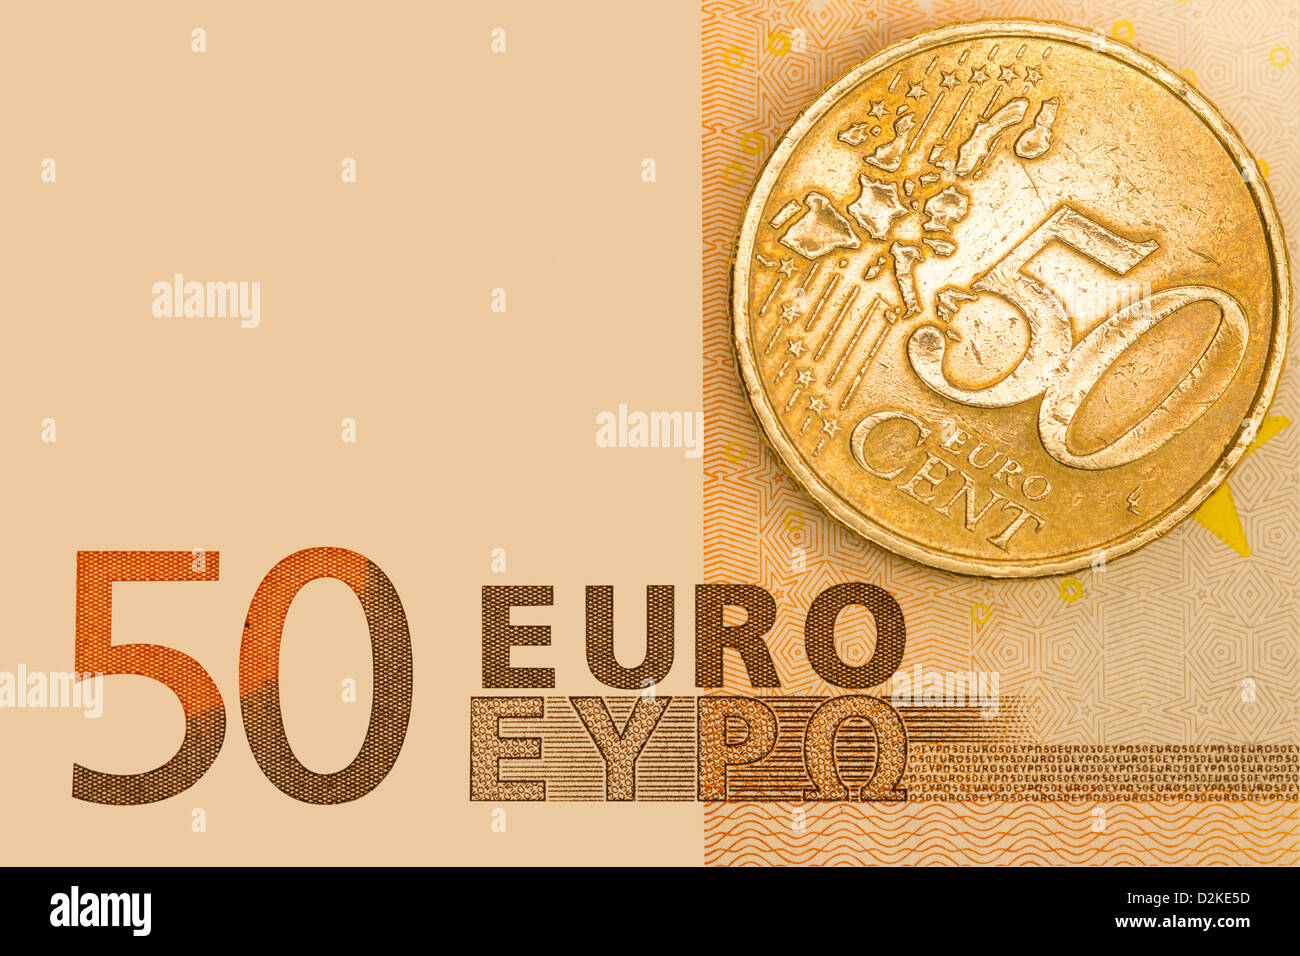 Euro currency Stock Photo